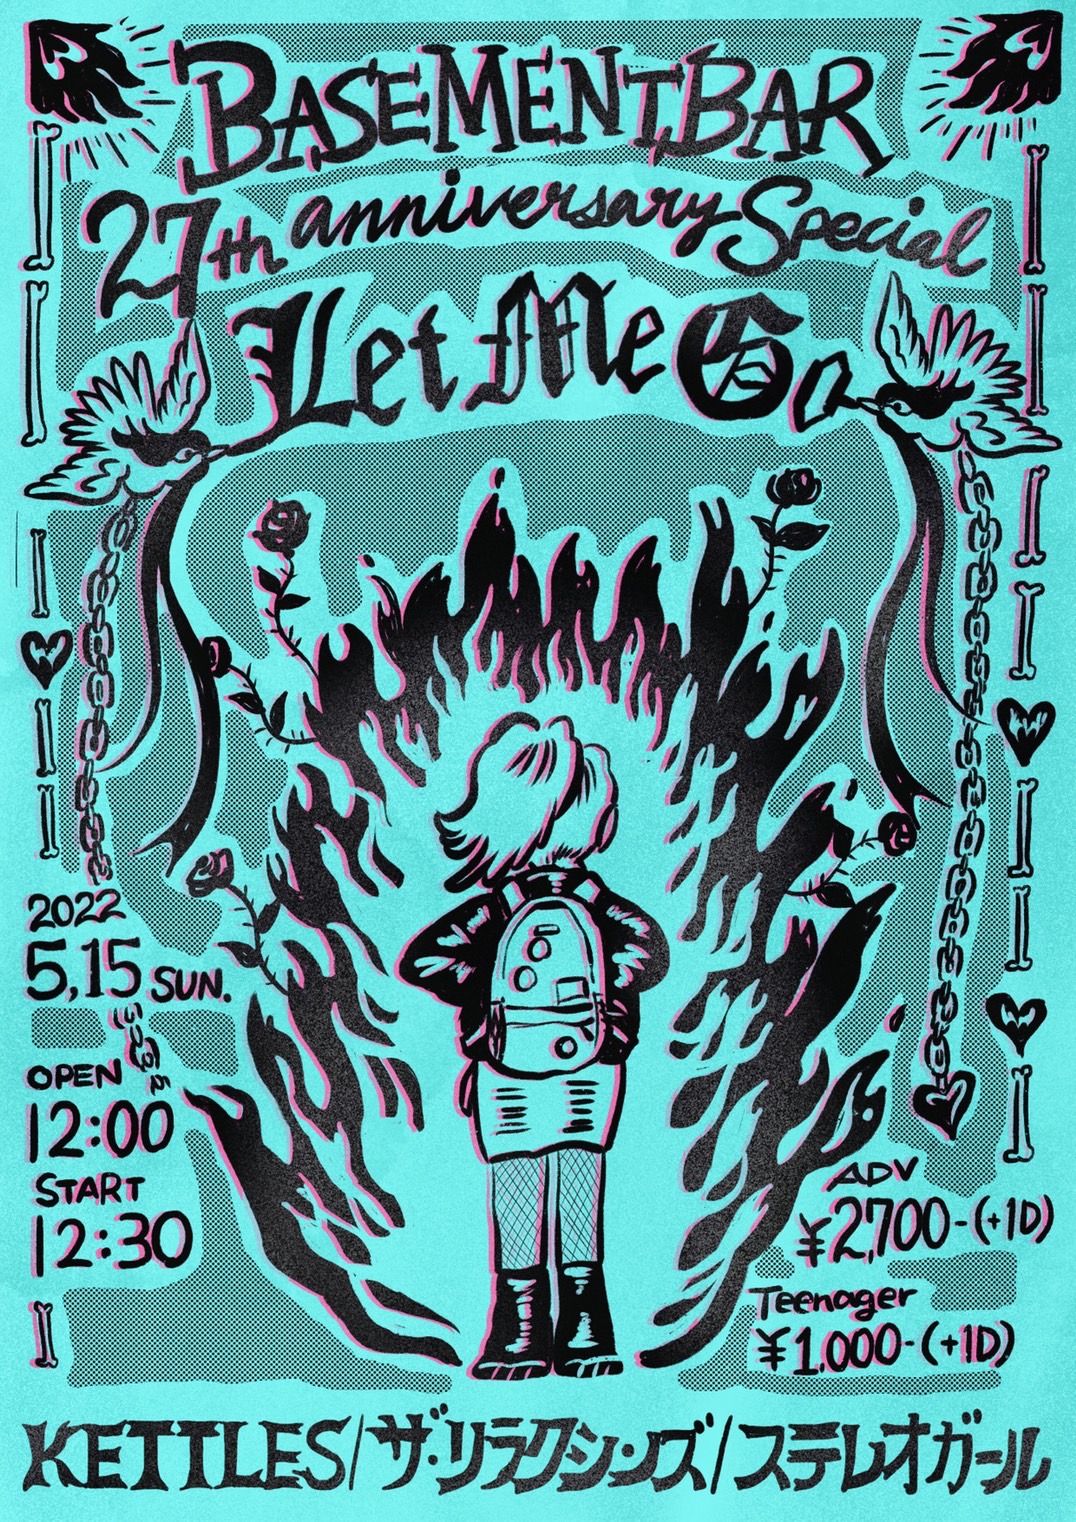 BASEMENTBAR 27th anniversary special “Let me go”